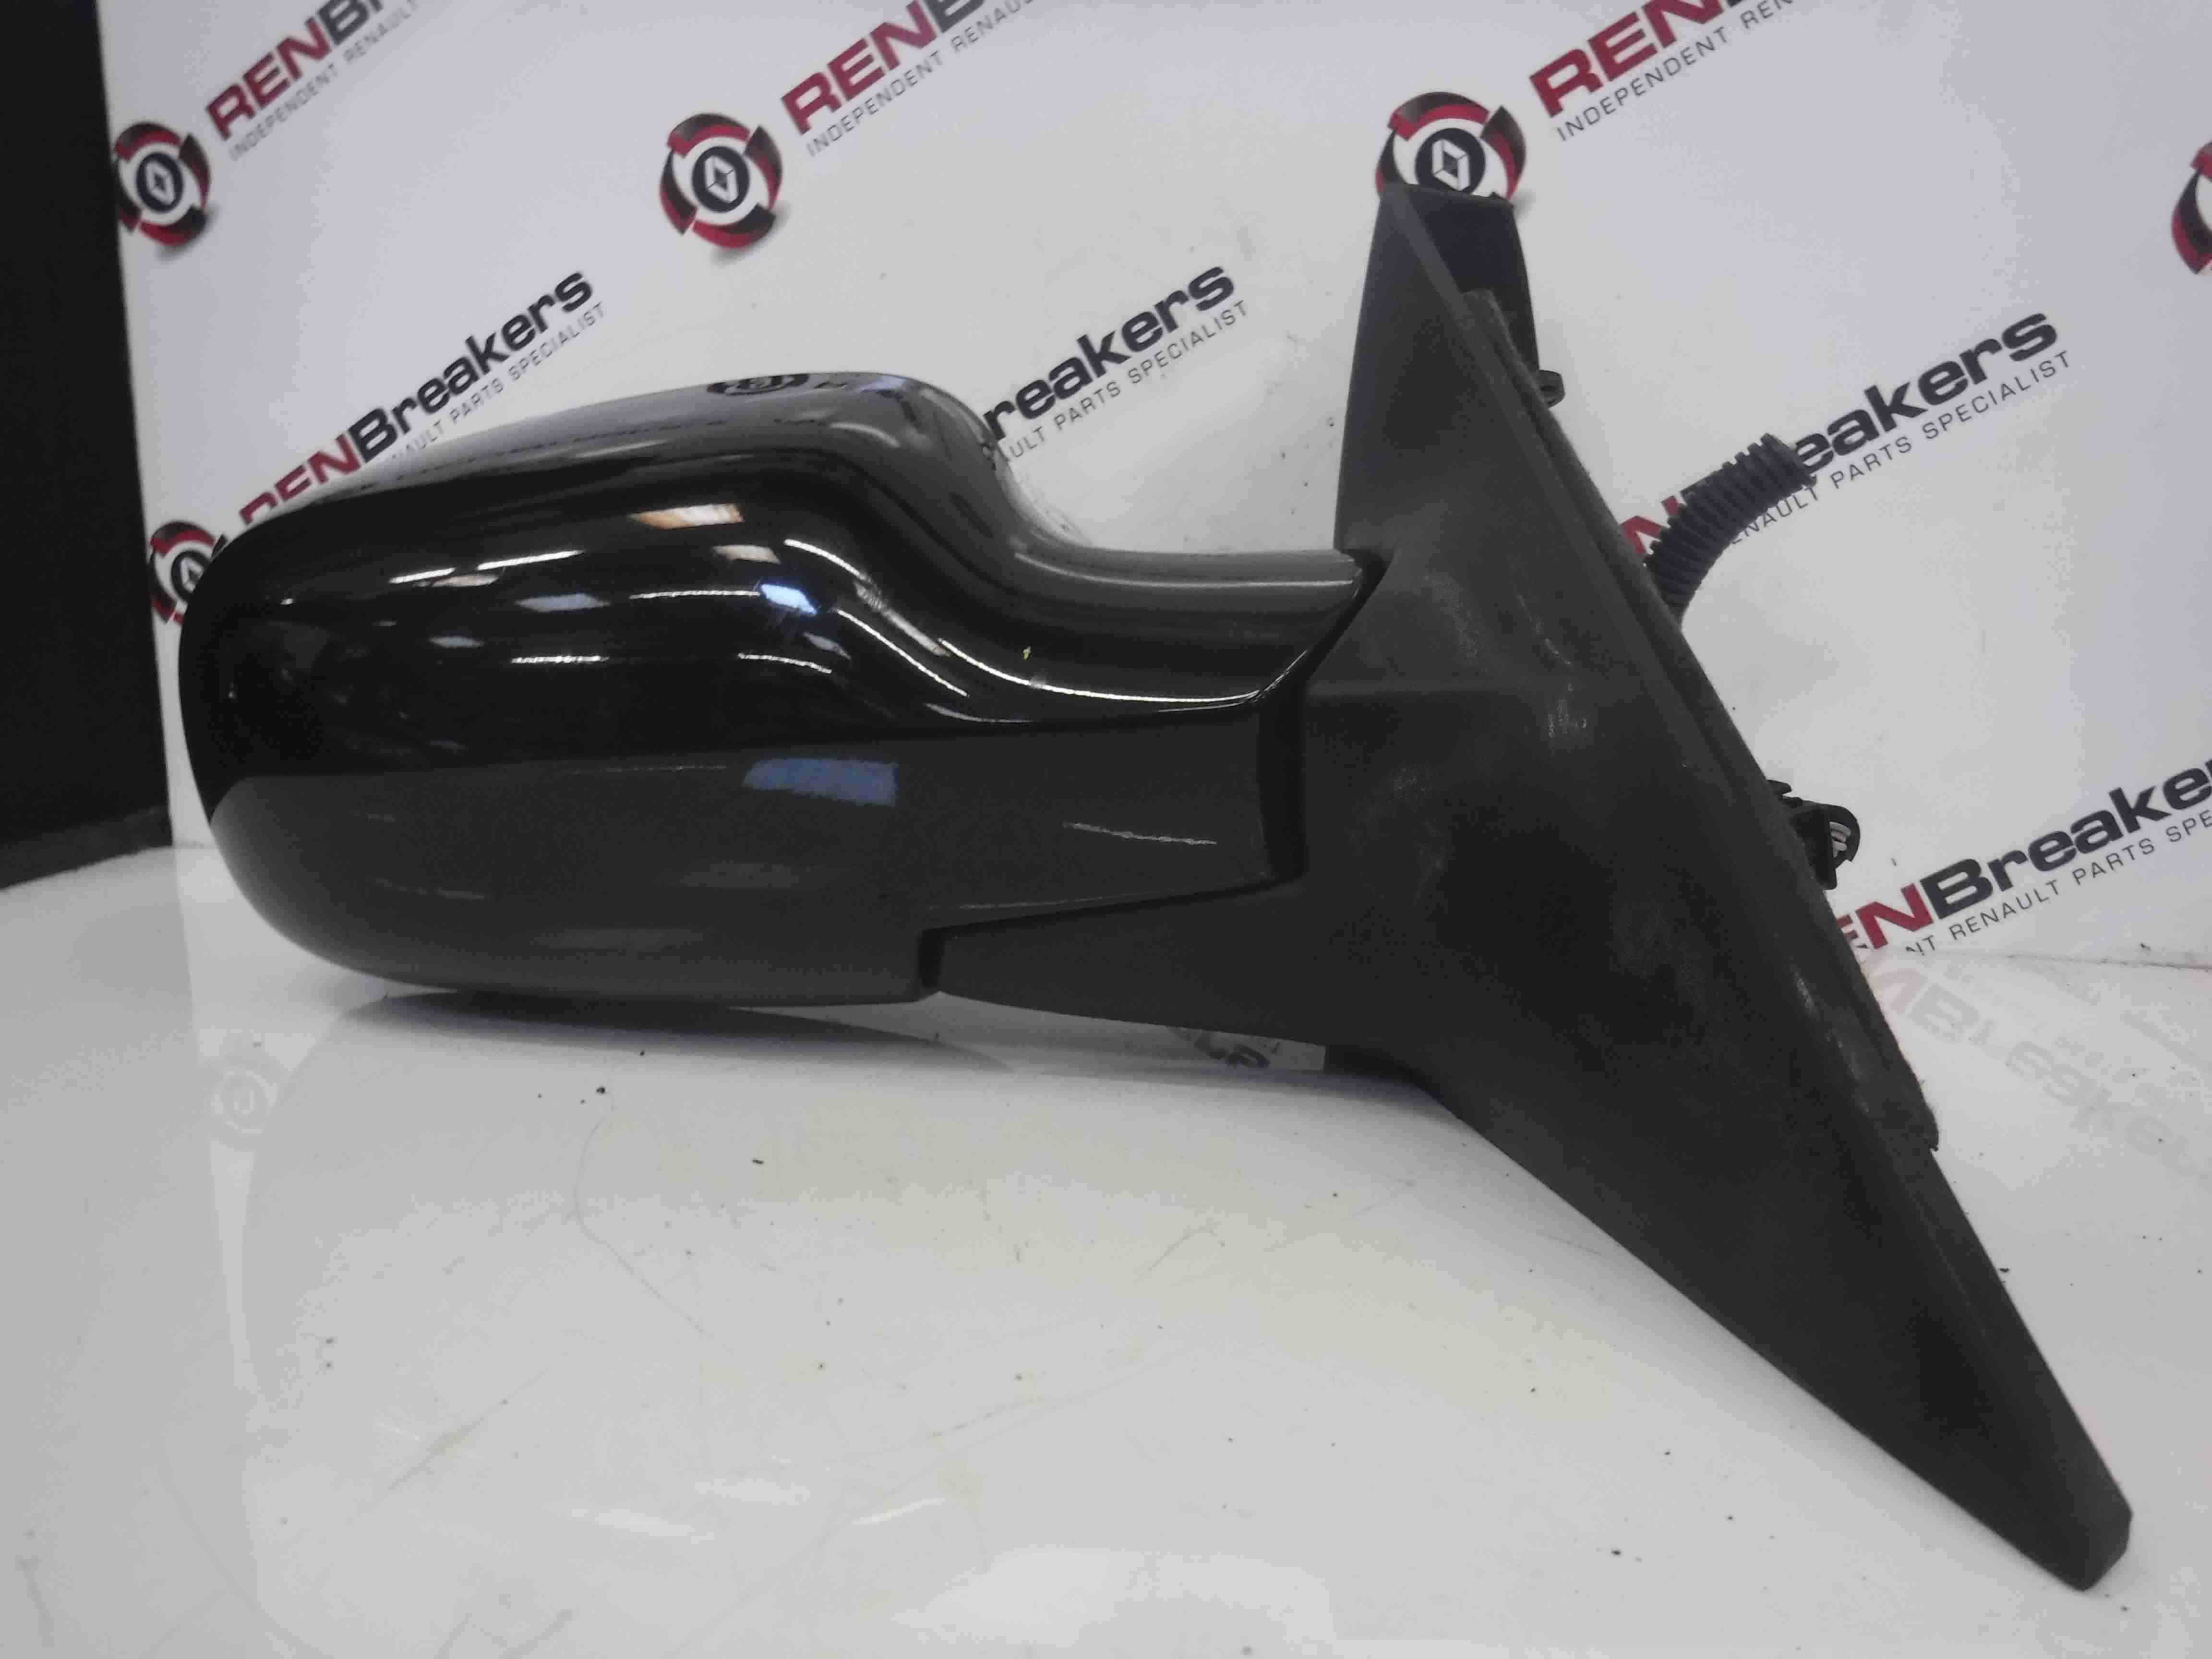 Renault Megane Scenic 2003-2009 Drivers OSF Front Wing Mirror Black 676